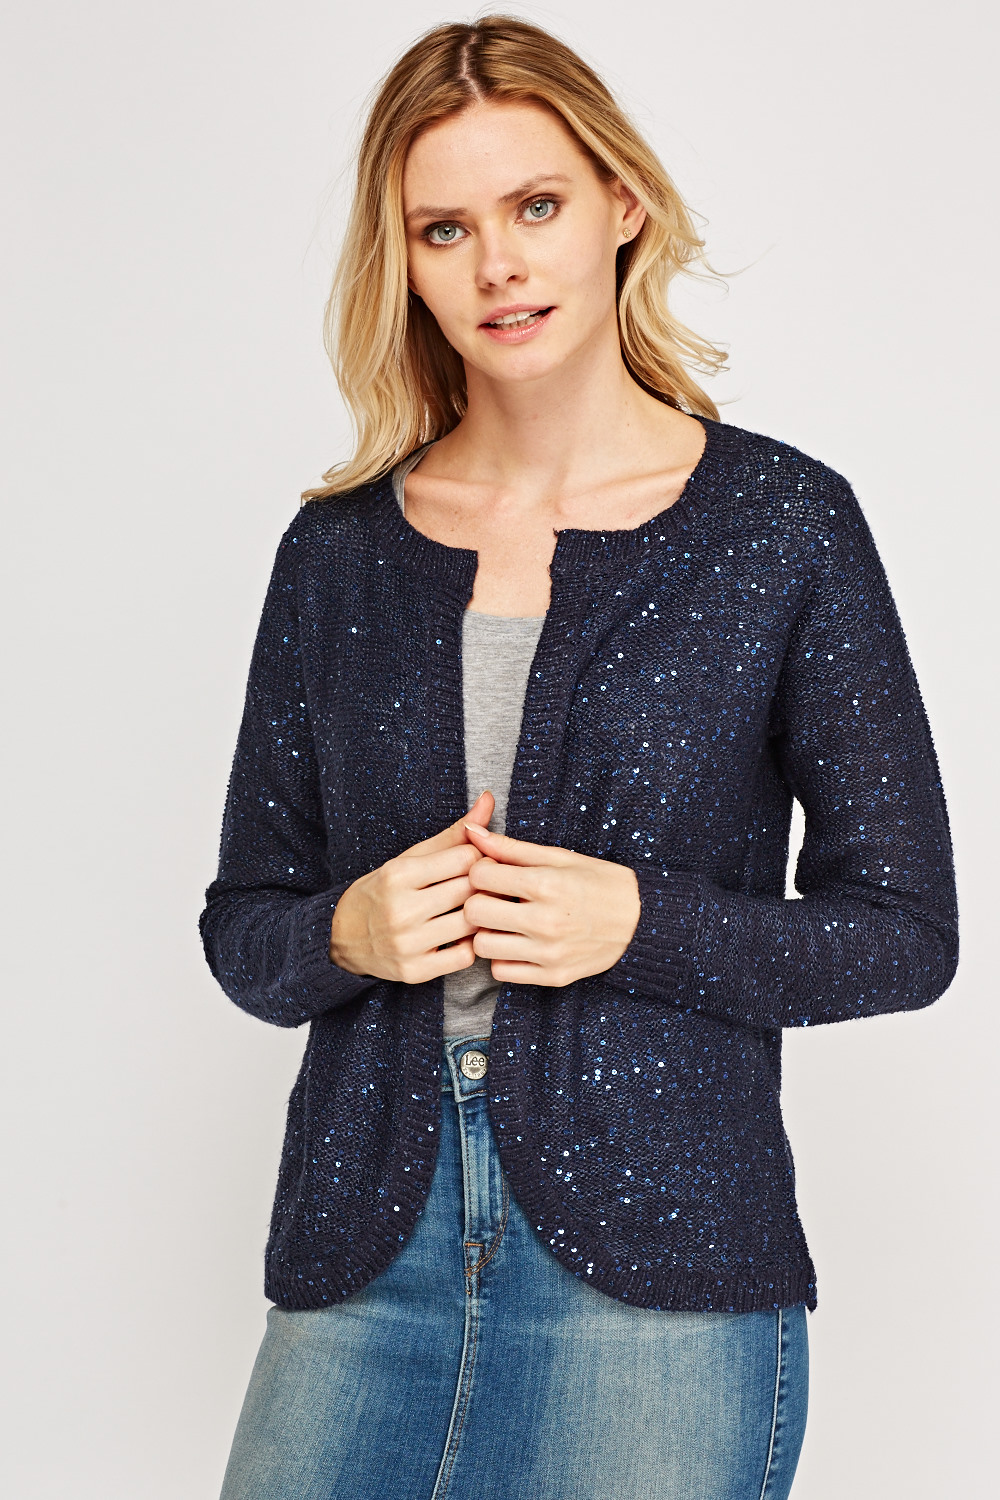 Sequin Knitted Cardigan Navy 70440 6 